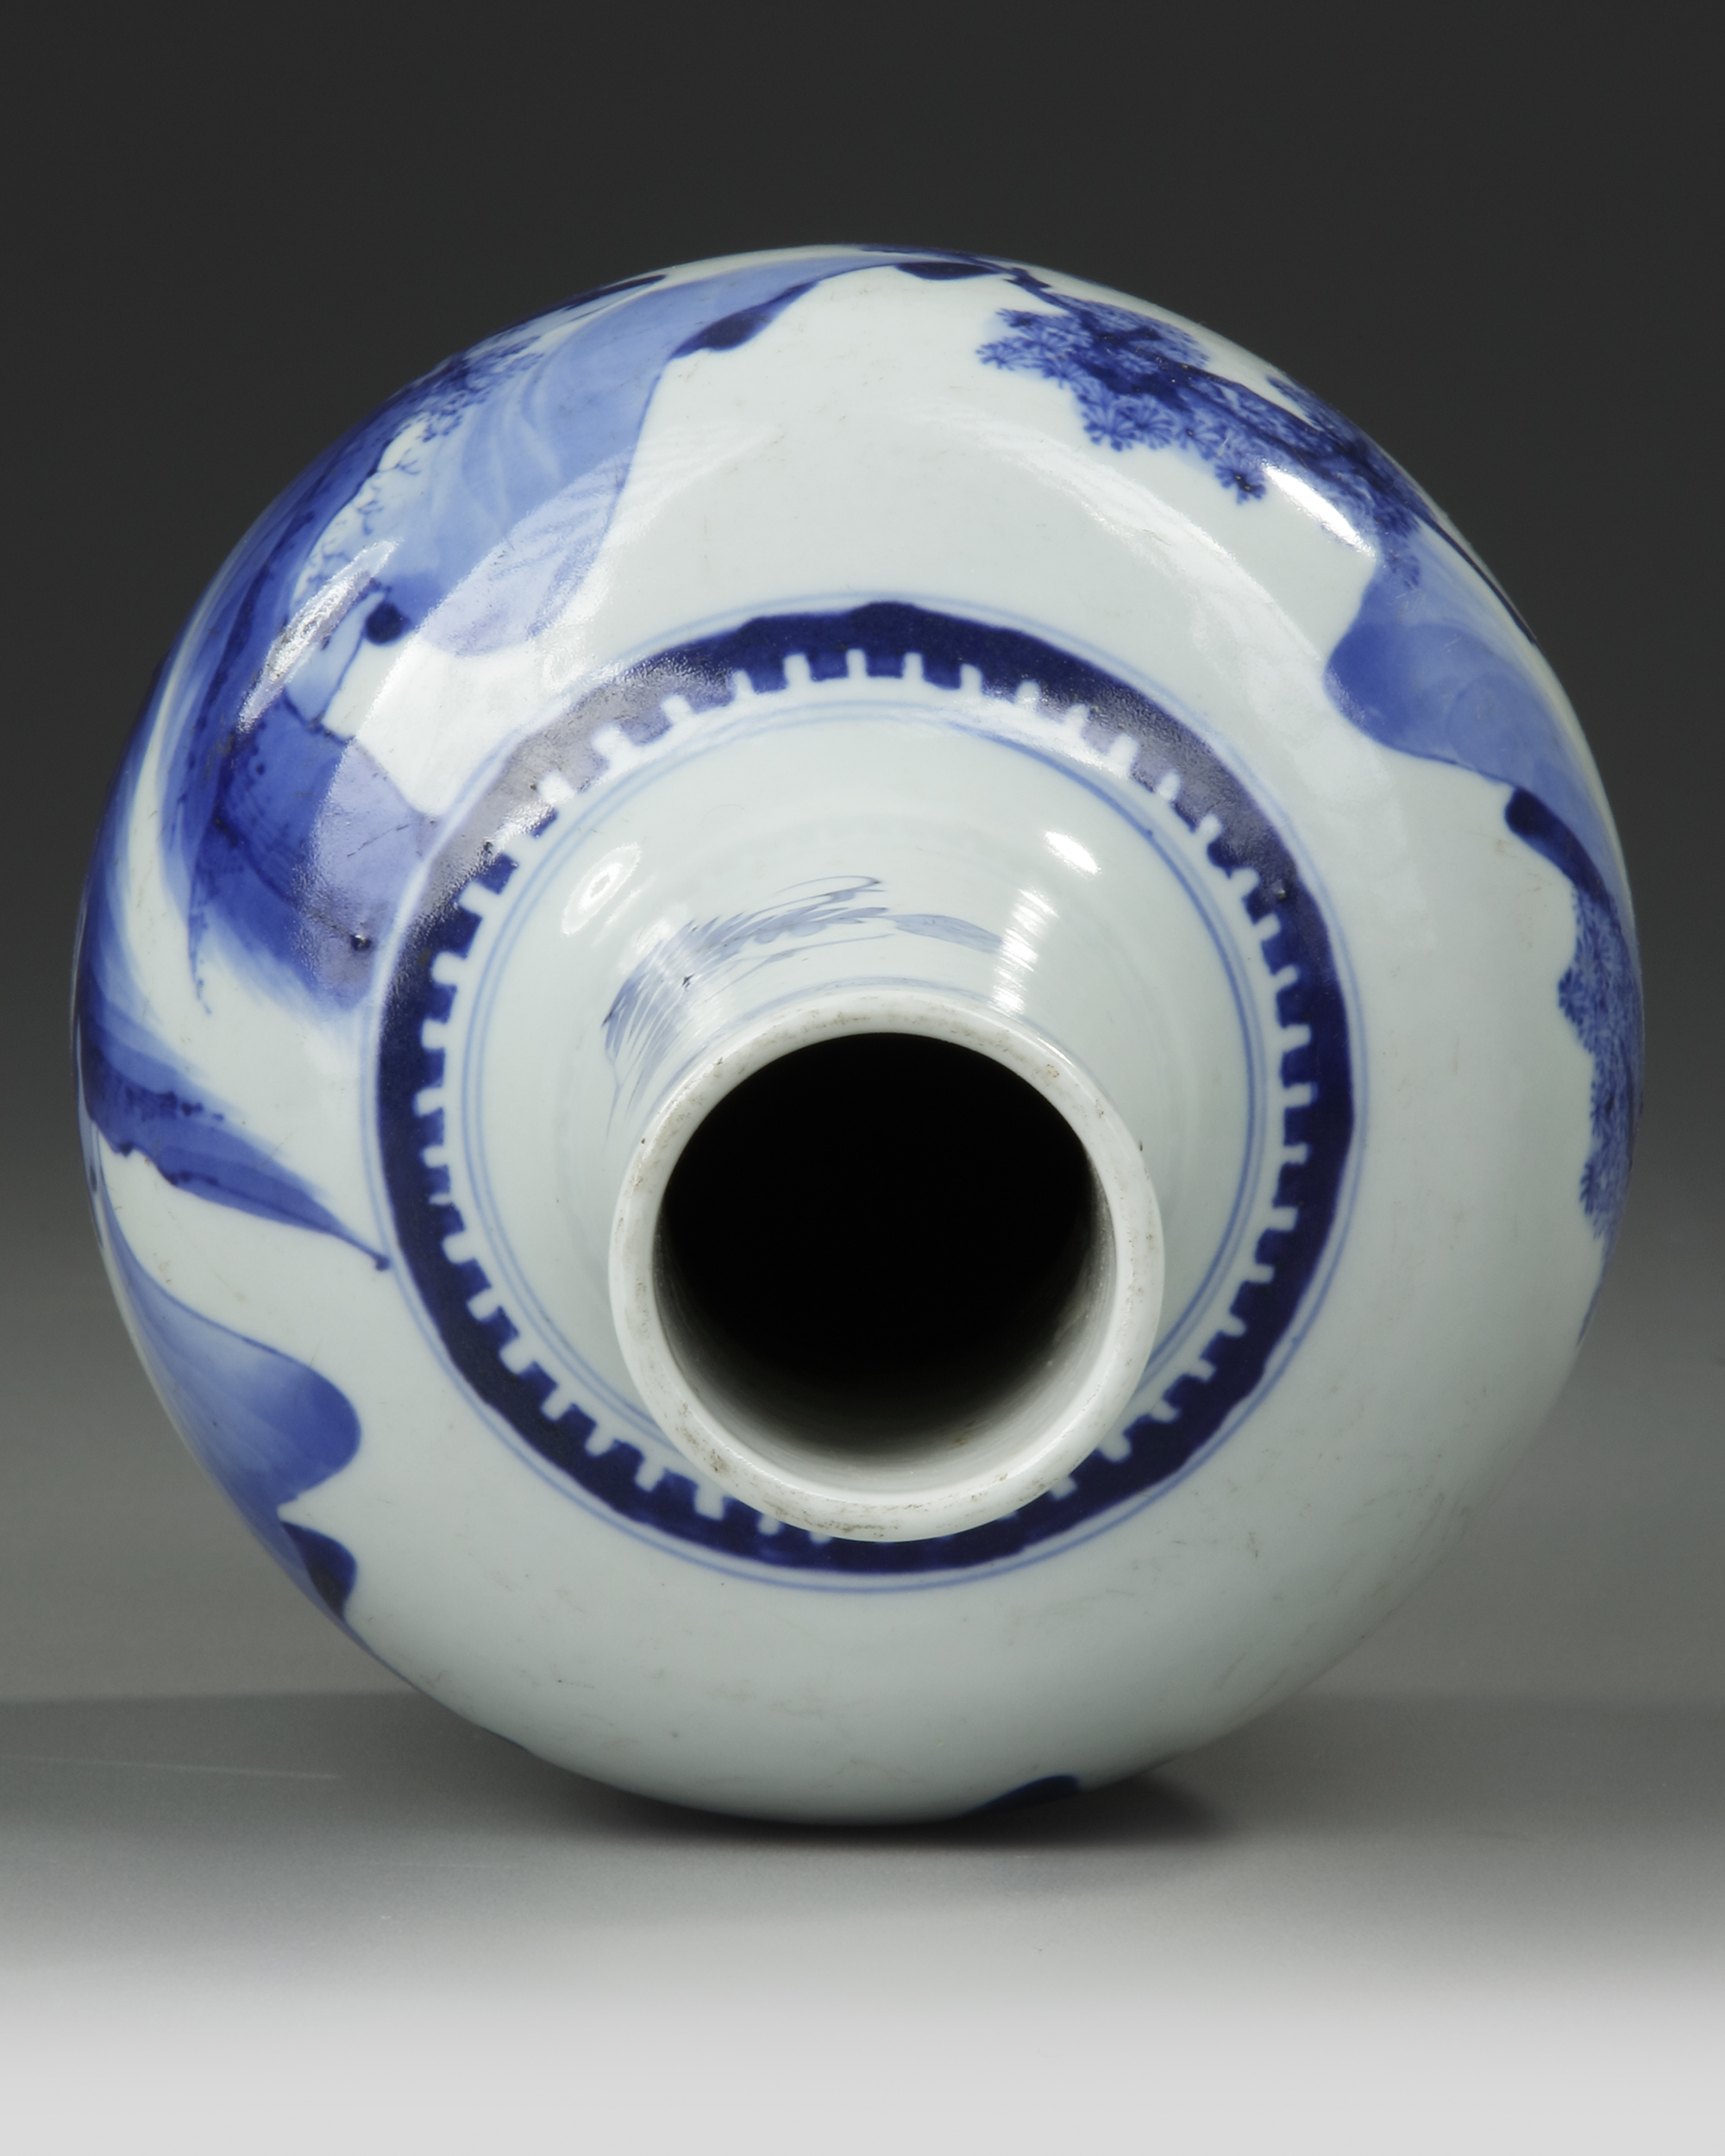 A CHINESE BLUE AND WHITE BOTTLE VASE, QING DYNASTY (1644-1911) - Image 3 of 4